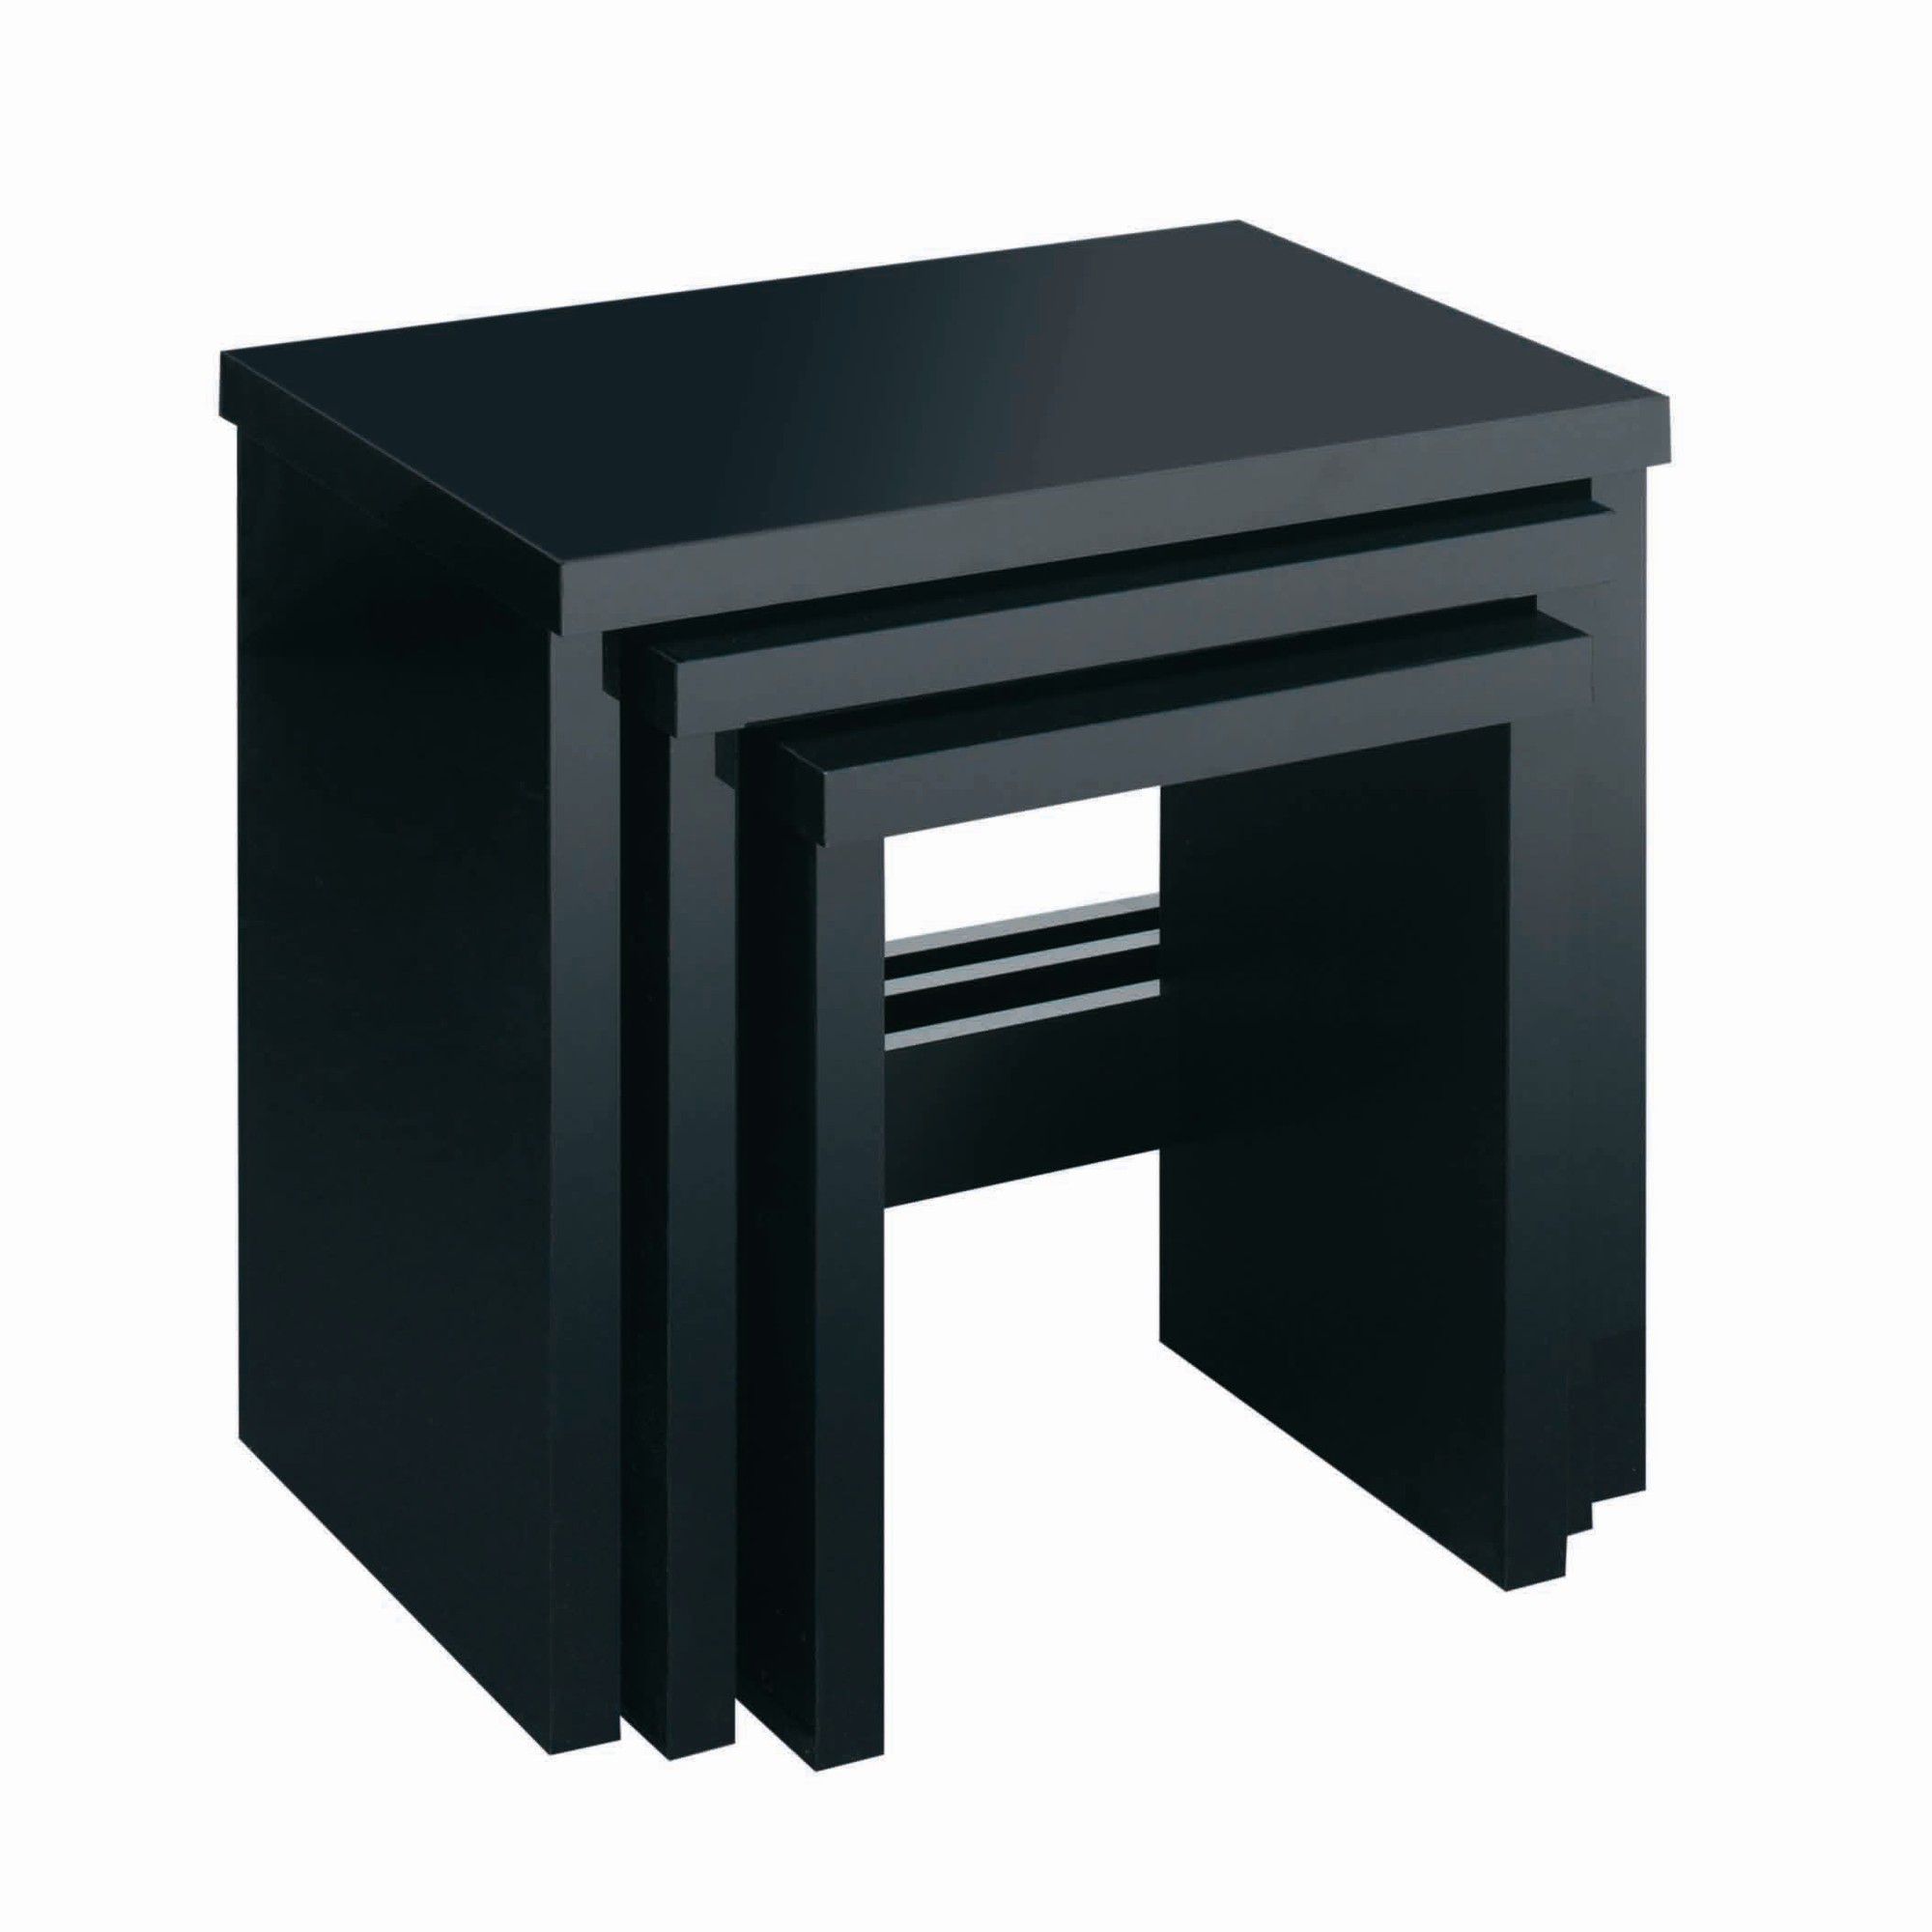 Caxton Manhattan Nest of Tables in Black Gloss at Tescos Direct